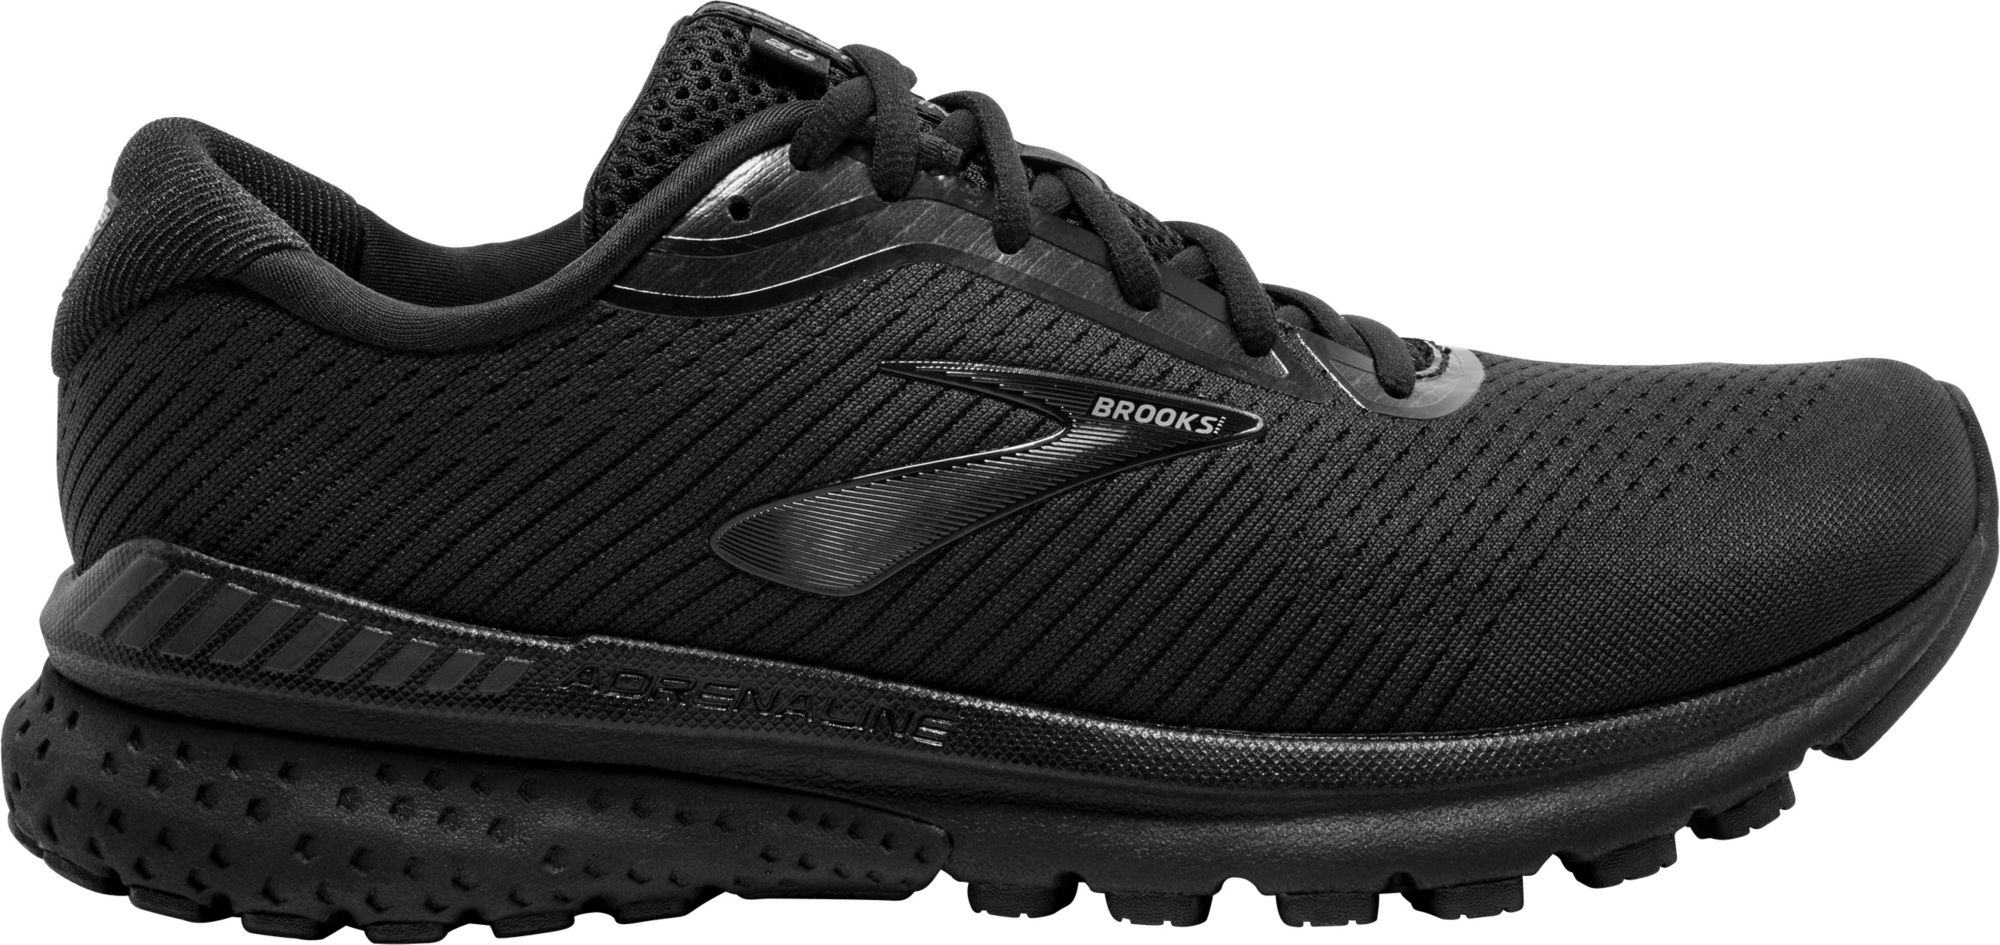 mens brooks running shoes clearance